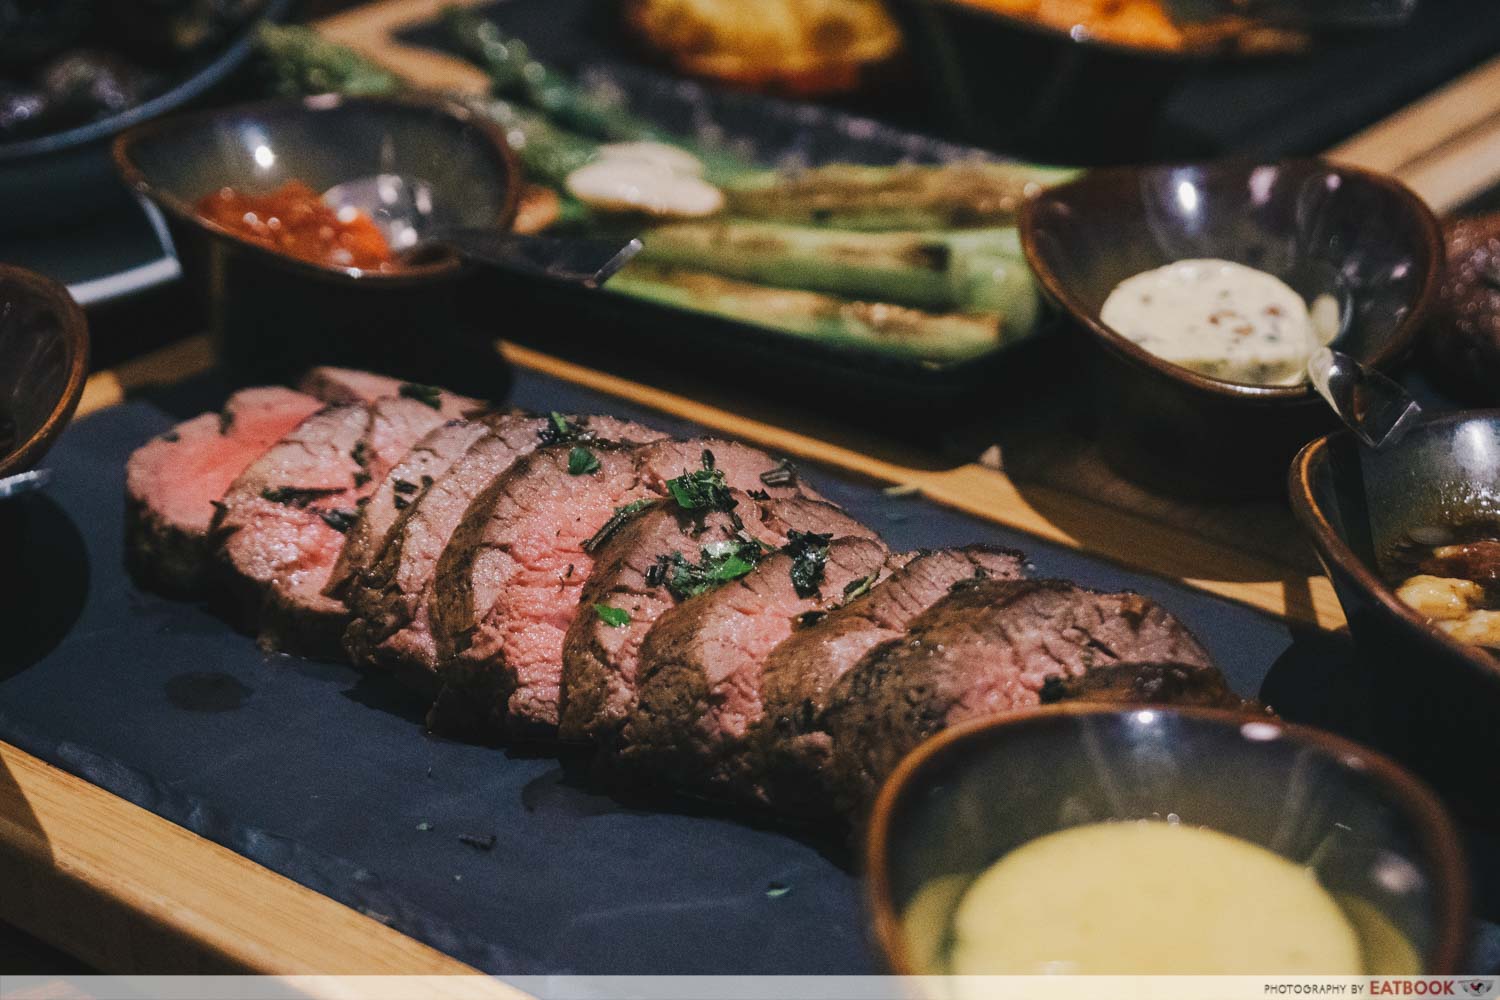 10 New Restuarants April - OPus Bar and Grill Chateaubriand